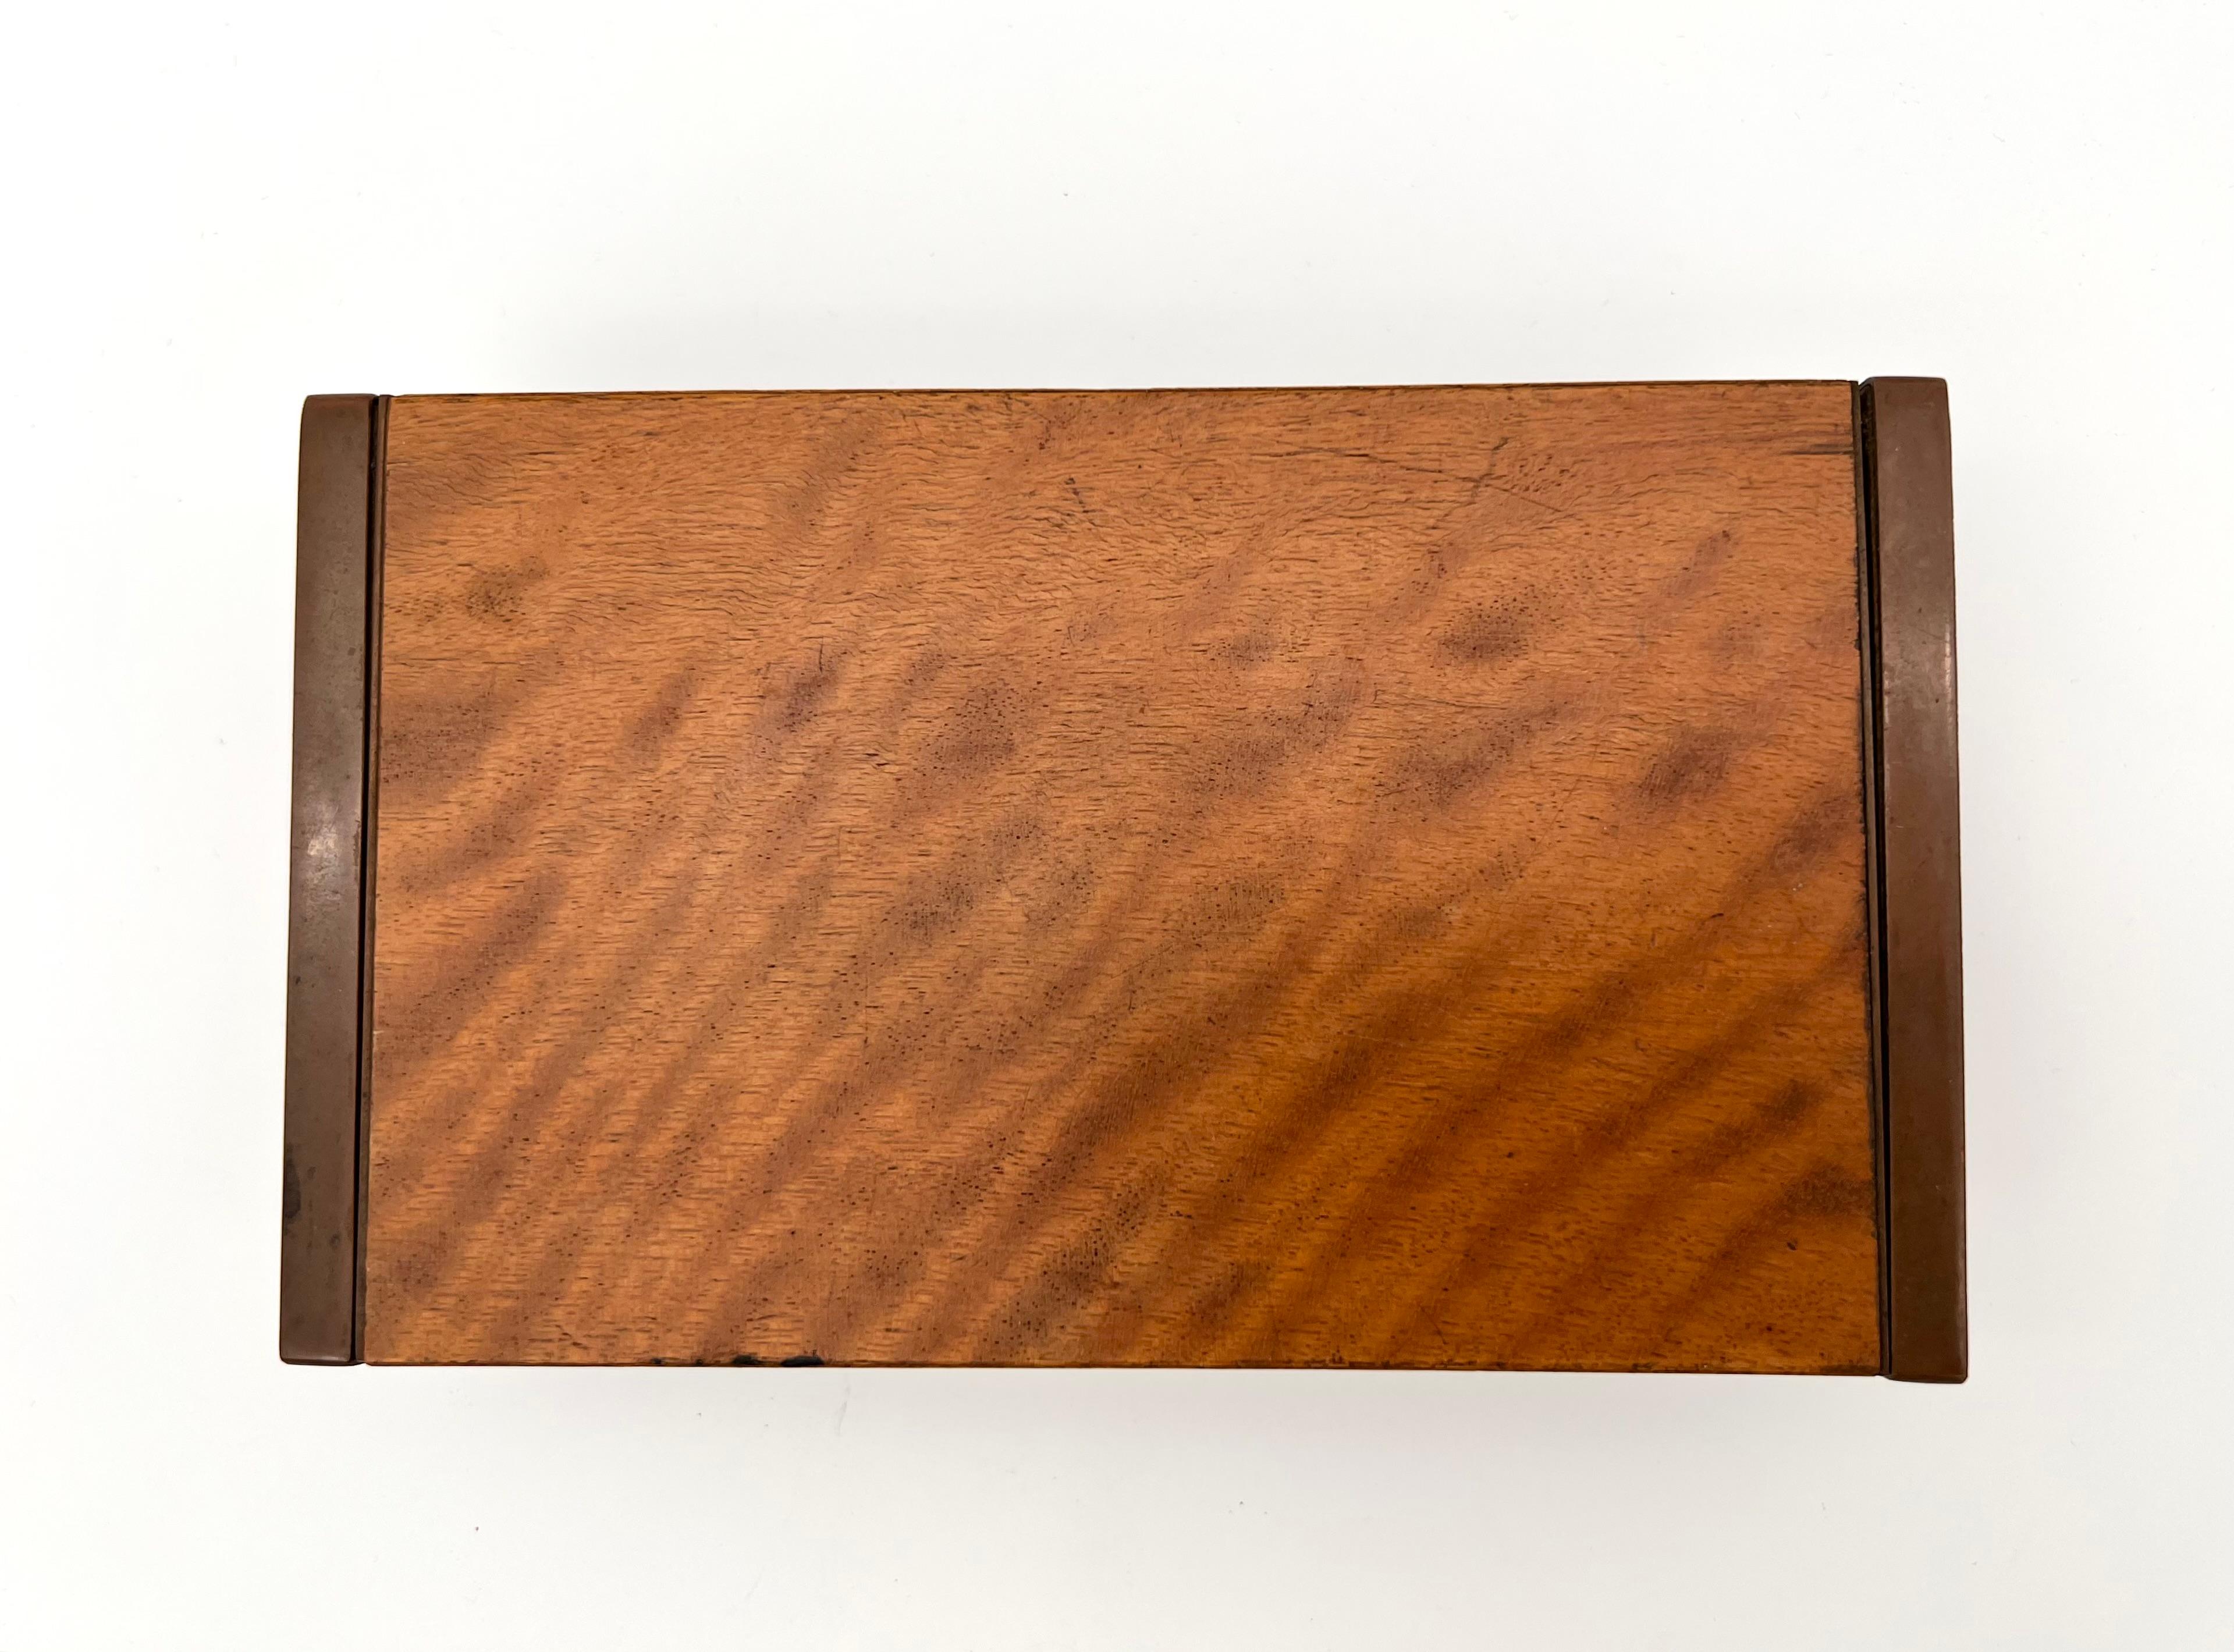 Art Deco Box made of wood, inside copper. By Carl Auböck, 1930s.

Listed in catalog 